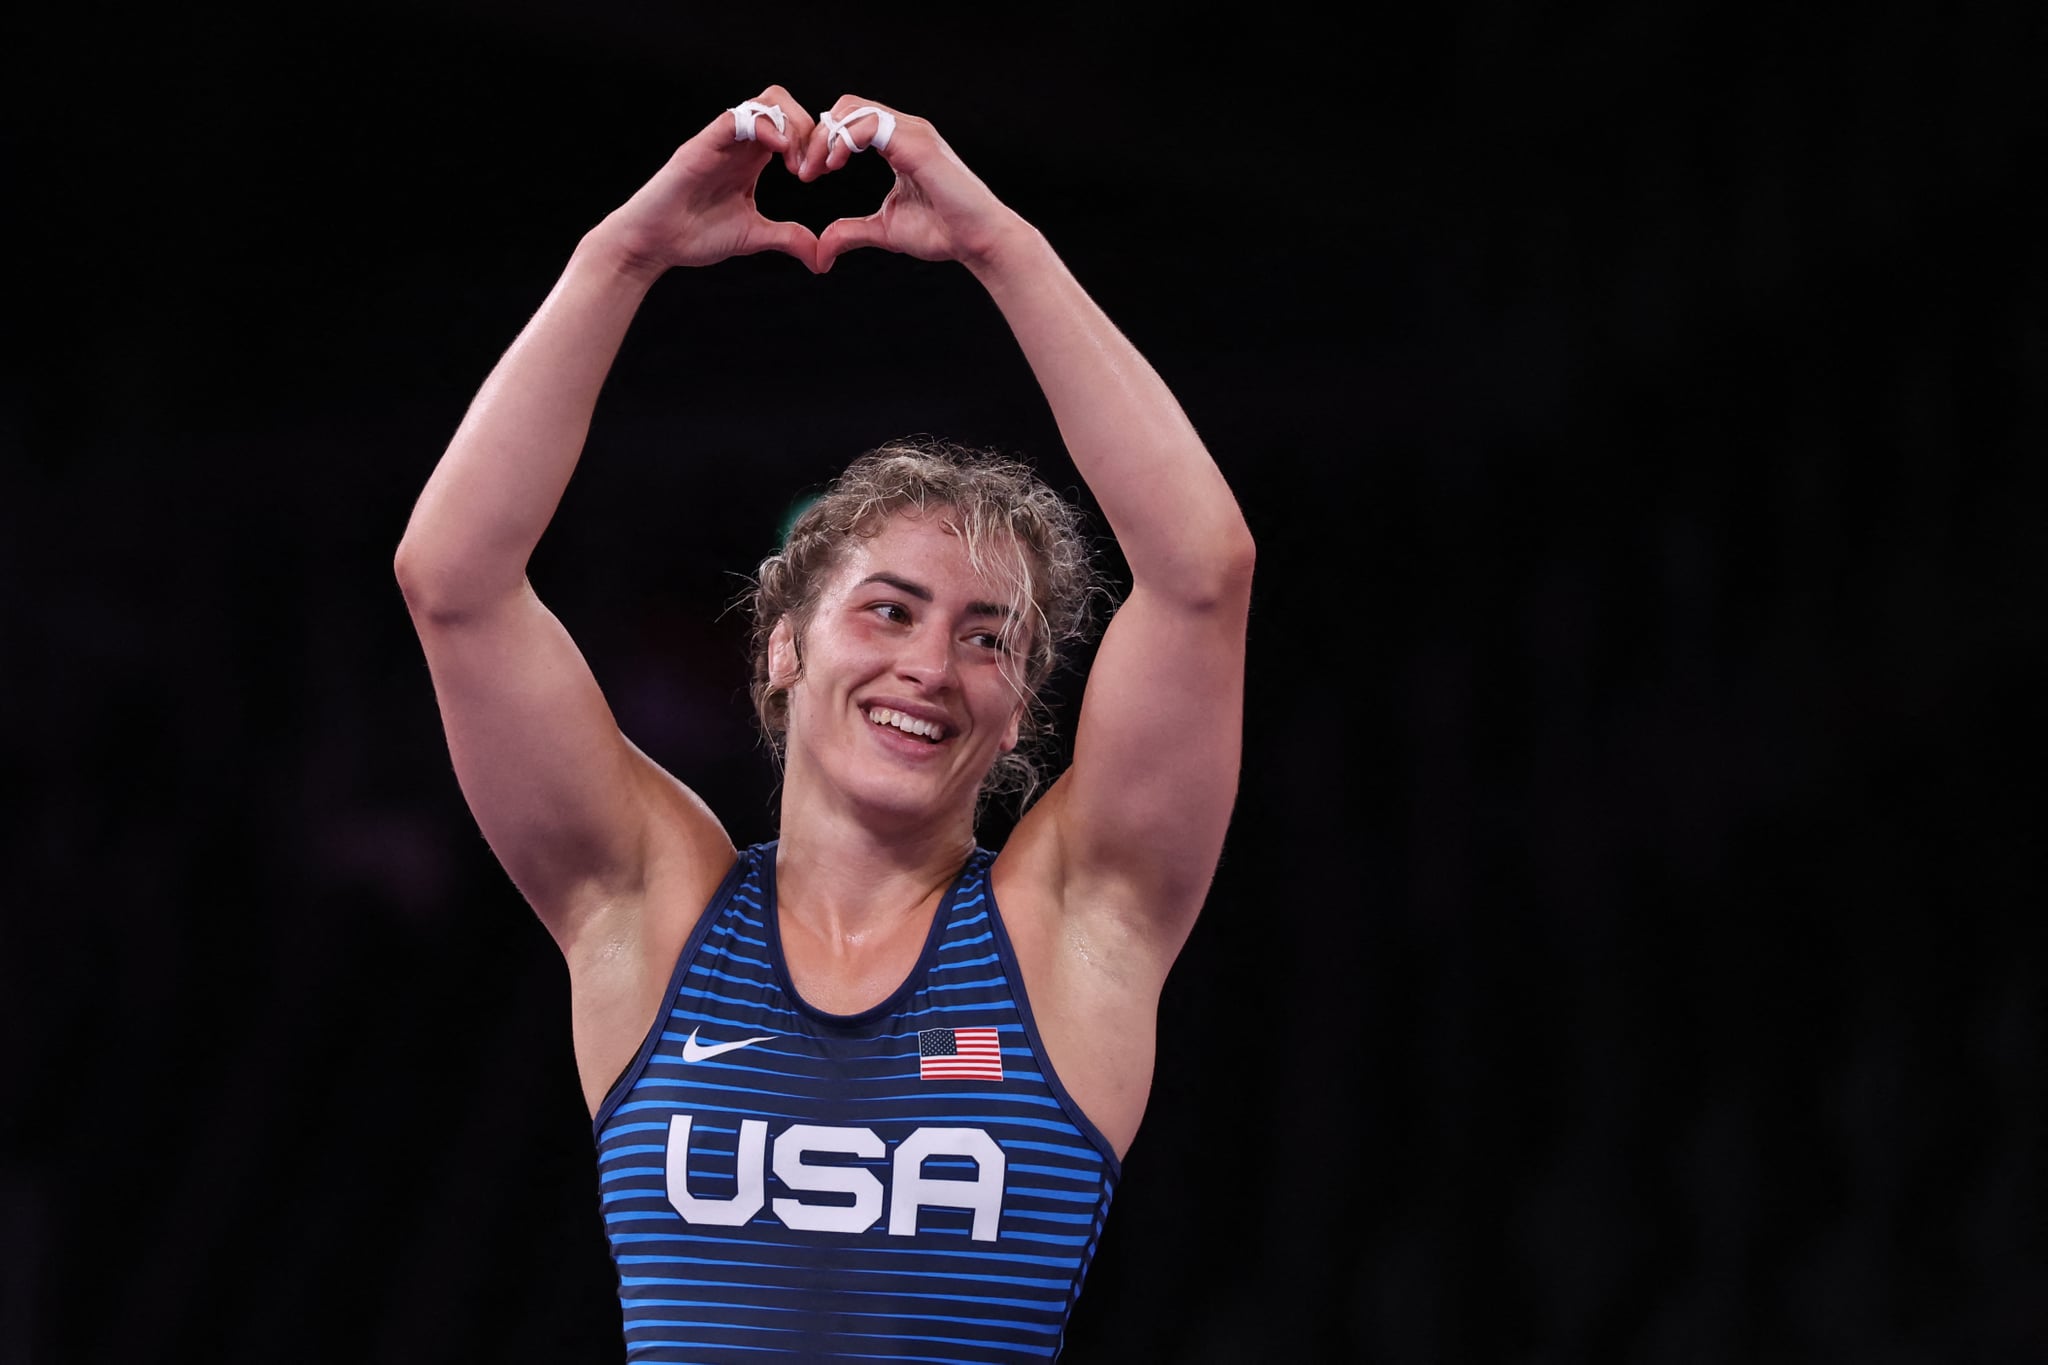 USA's Helen Louise Maroulis reacts after defeating Mongolia's Khongorzul Boldsaikhan in their women's freestyle 57kg wrestling bronze medal match during the Tokyo 2020 Olympic Games at the Makuhari Messe in Tokyo on August 5, 2021. (Photo by Jack GUEZ / AFP) (Photo by JACK GUEZ/AFP via Getty Images)